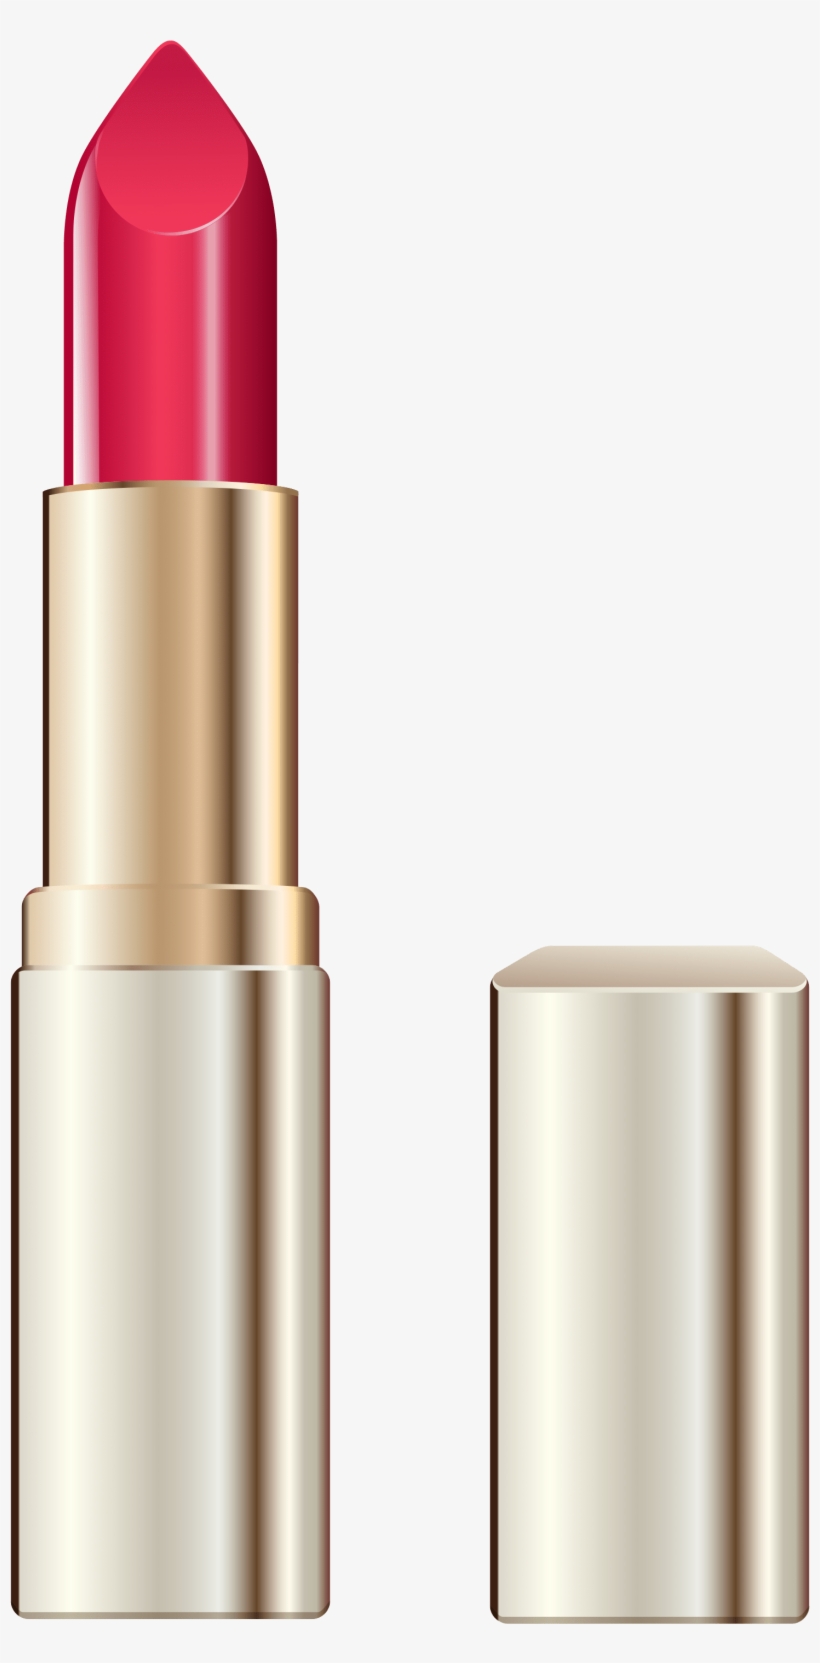 Pink Lipstick Png Clipart Picture Gallery Yoville High - Lipstick Png, transparent png #490214